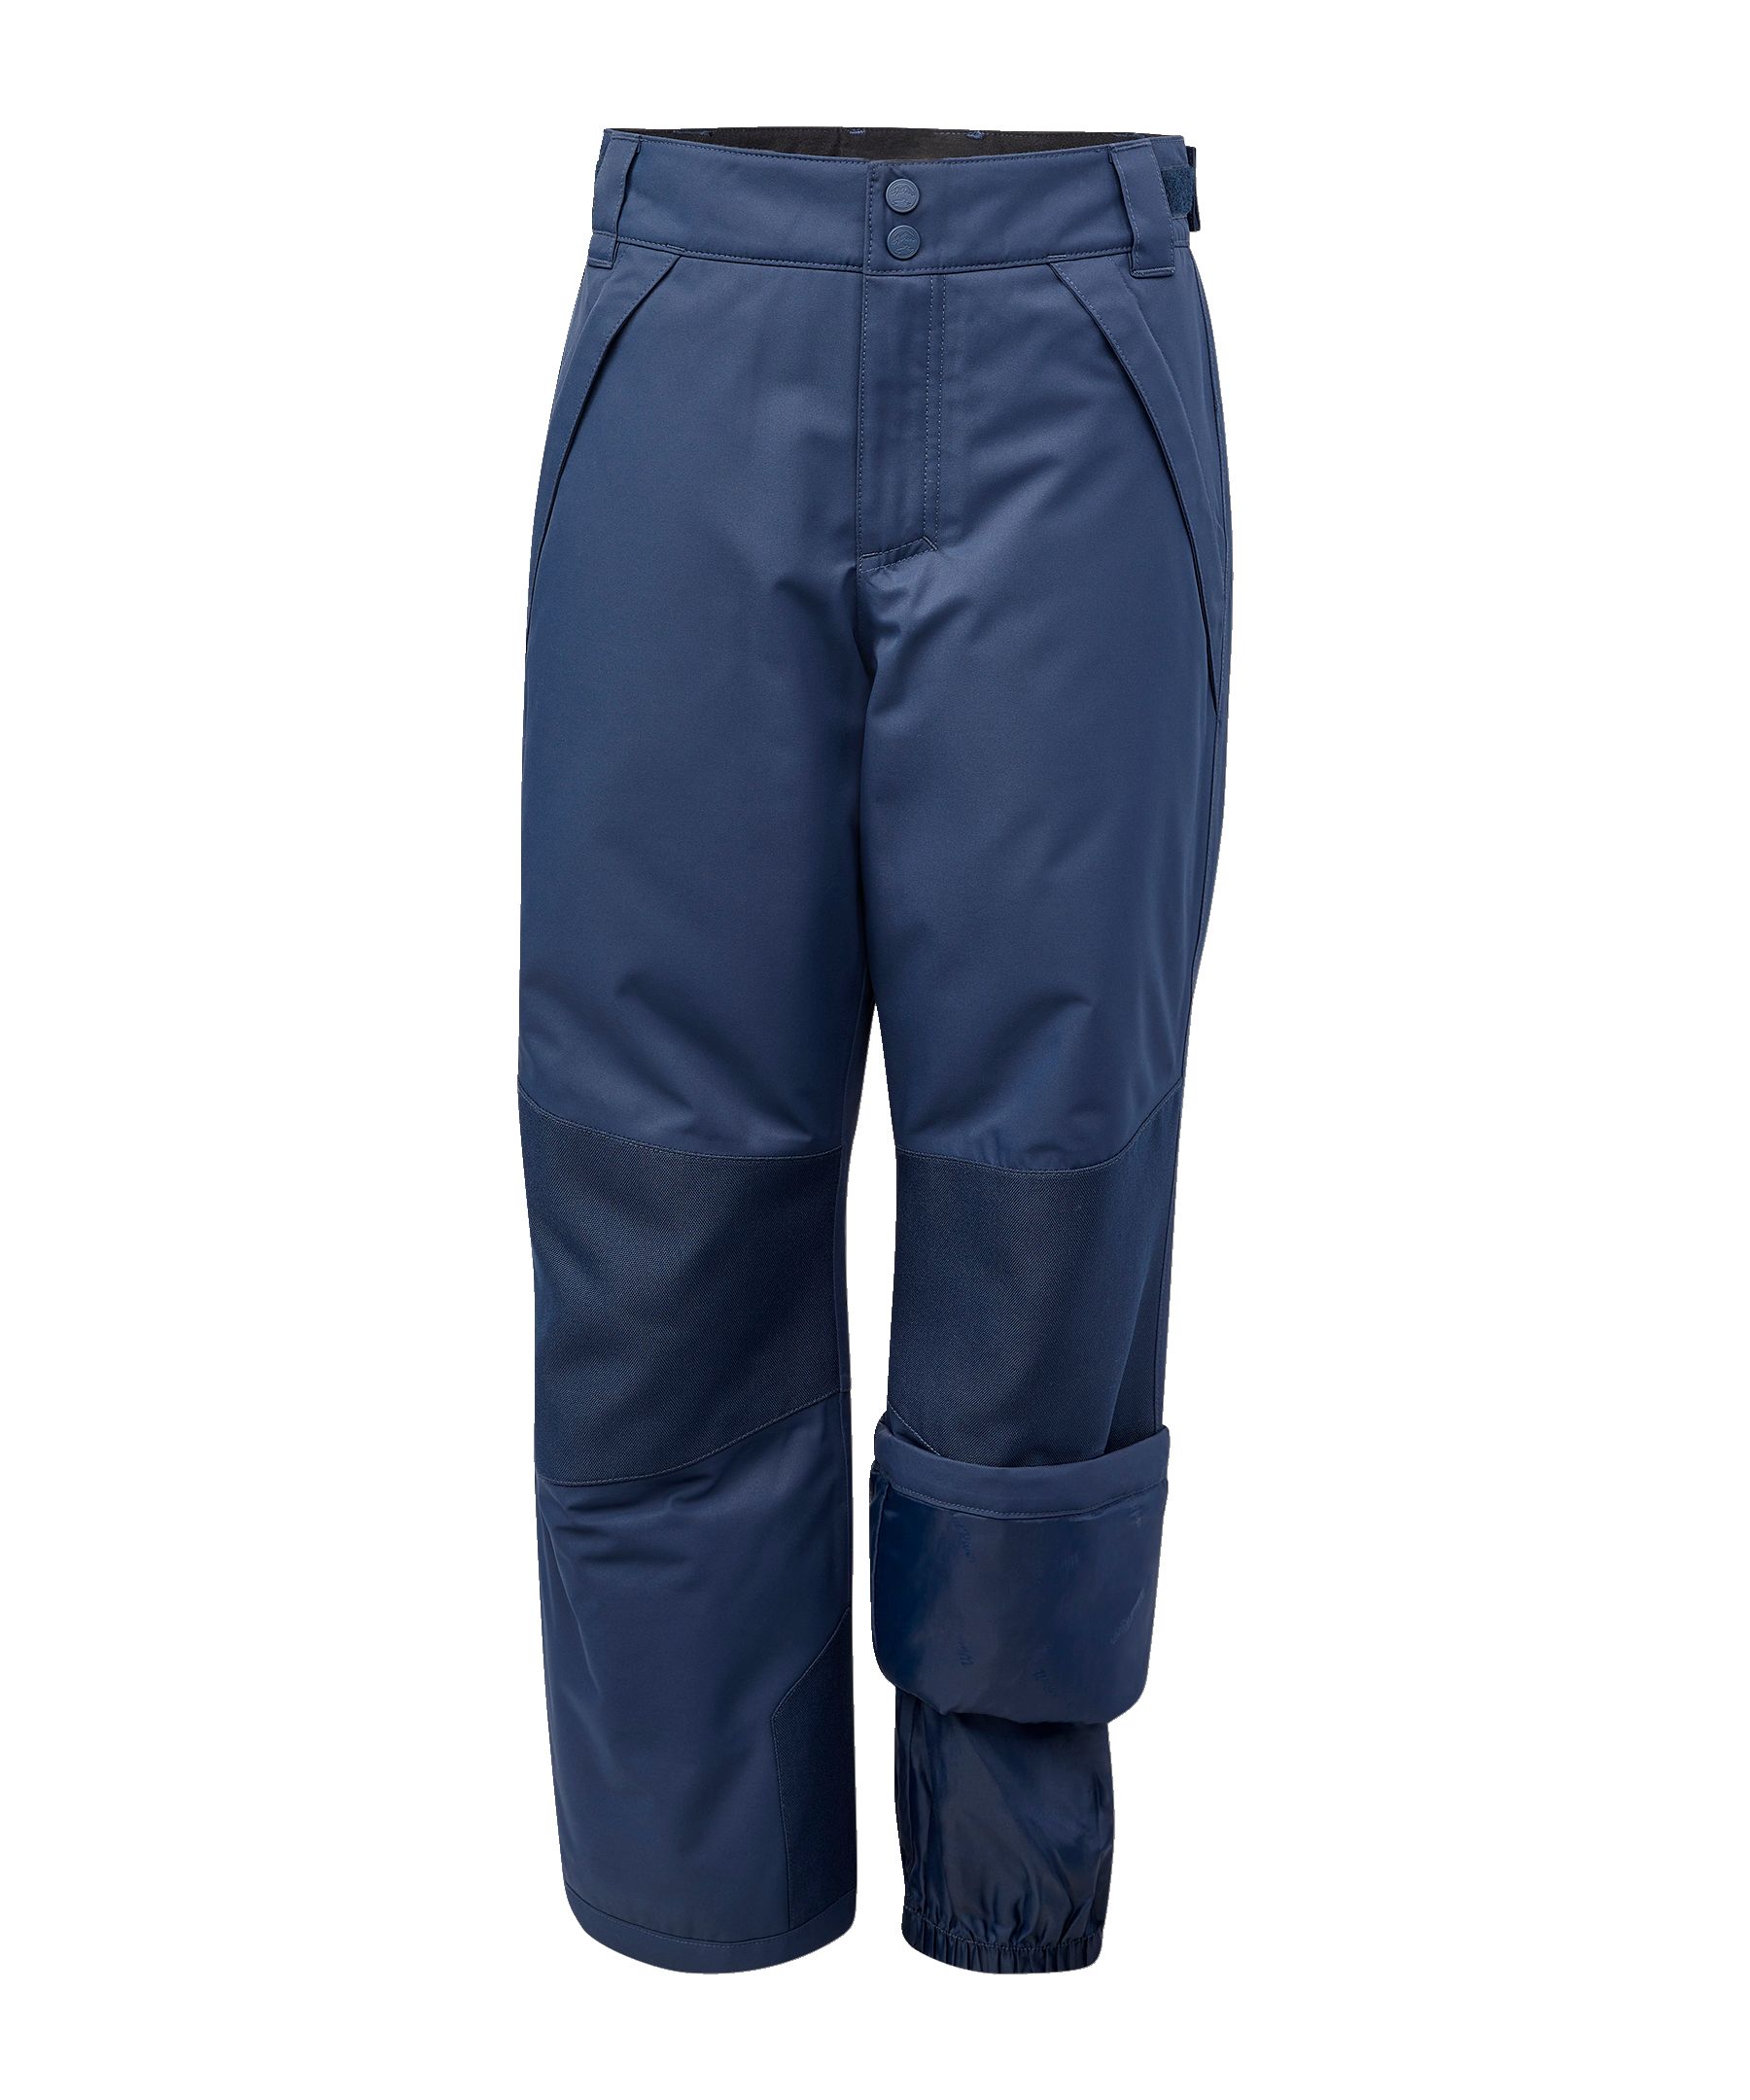 FarWest Unisex 7-16 Years Water Repellent Breathable Snow Pants